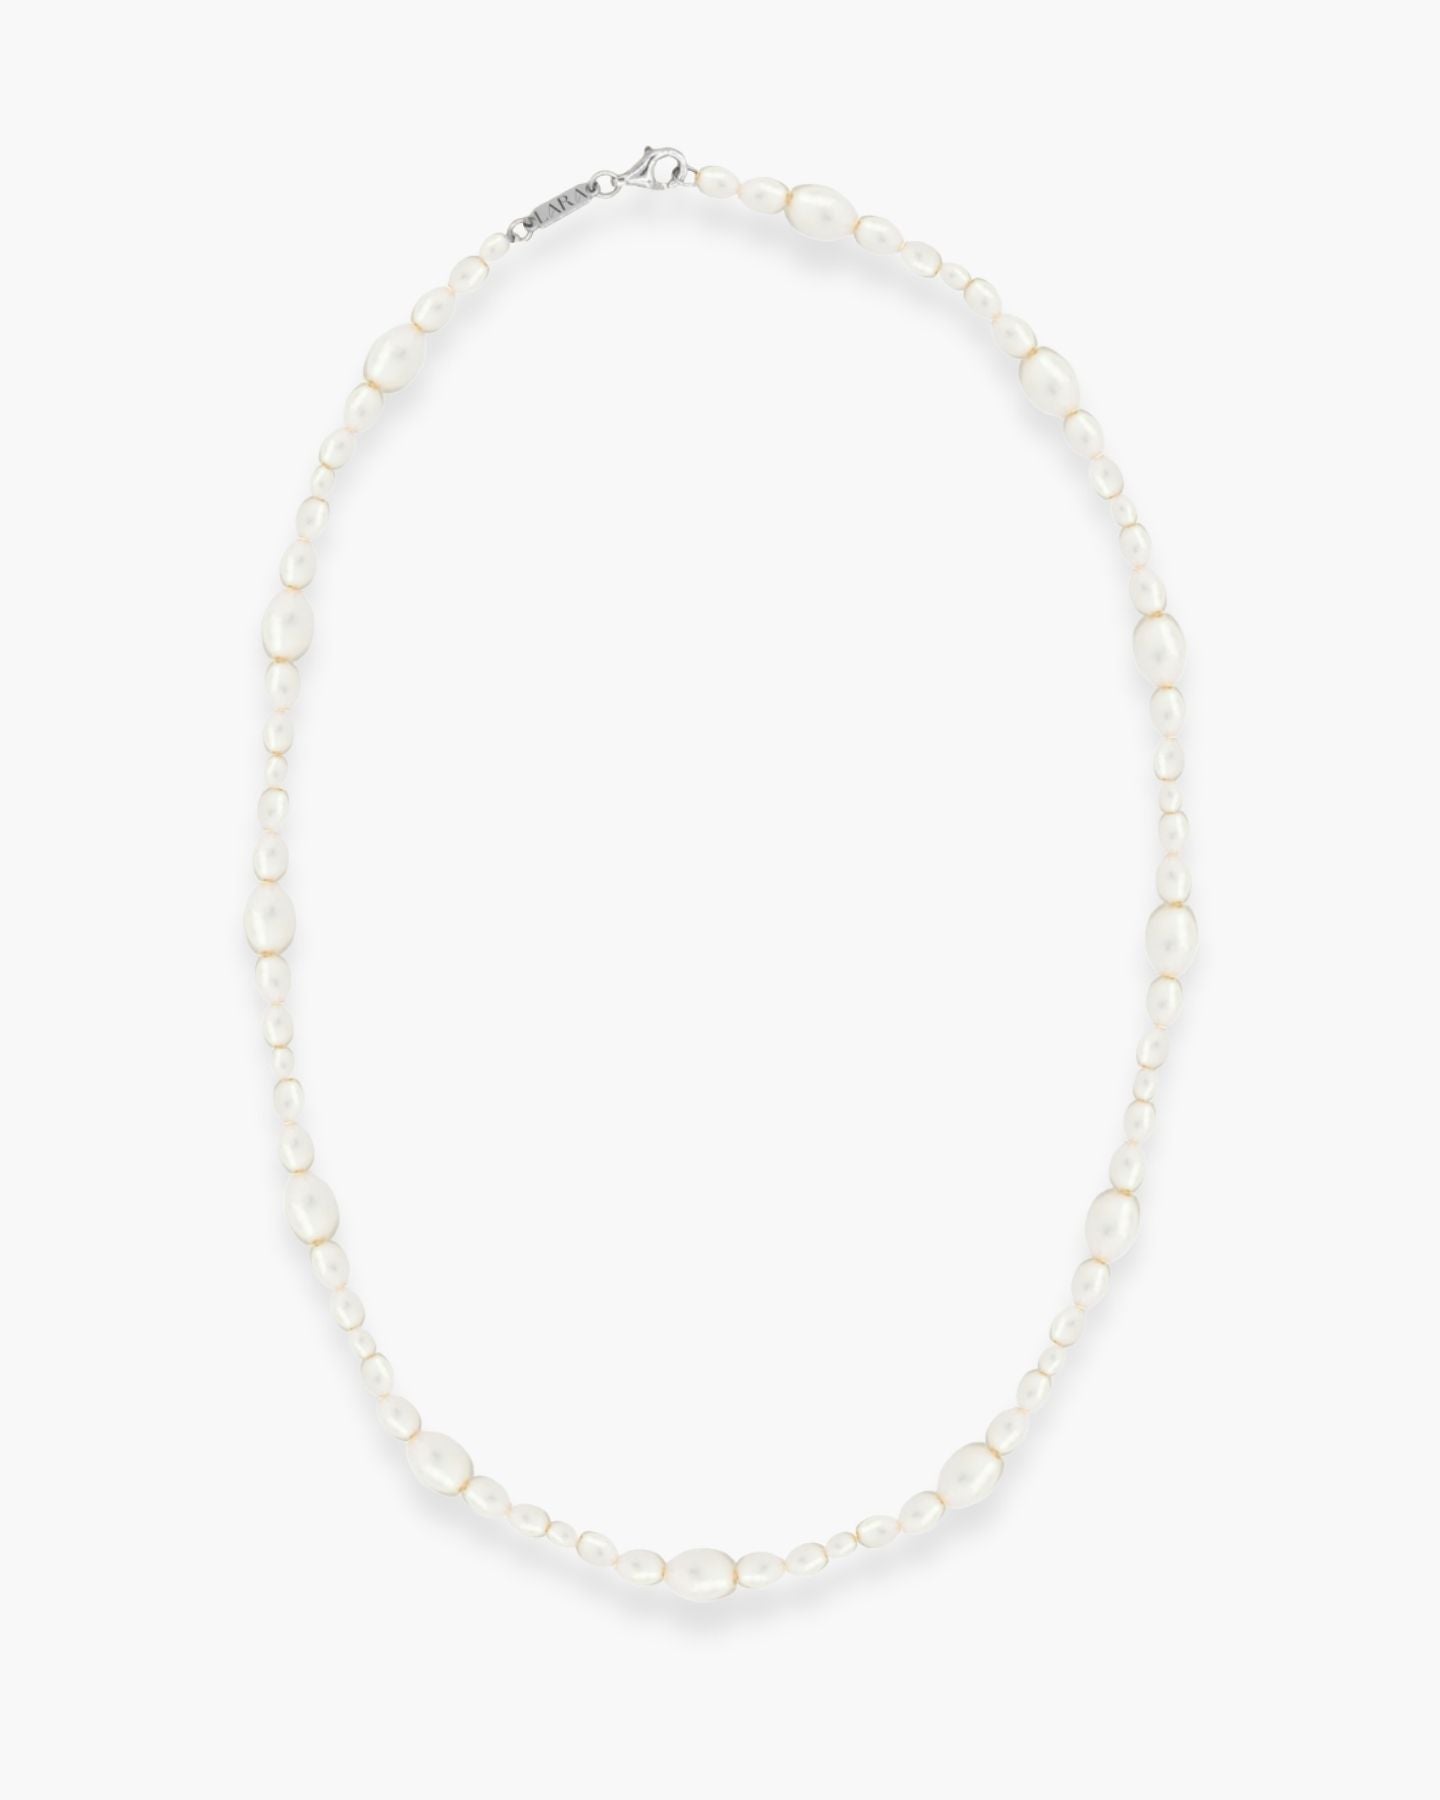 Thru Thick'n'Thin Pearl Necklace Silver